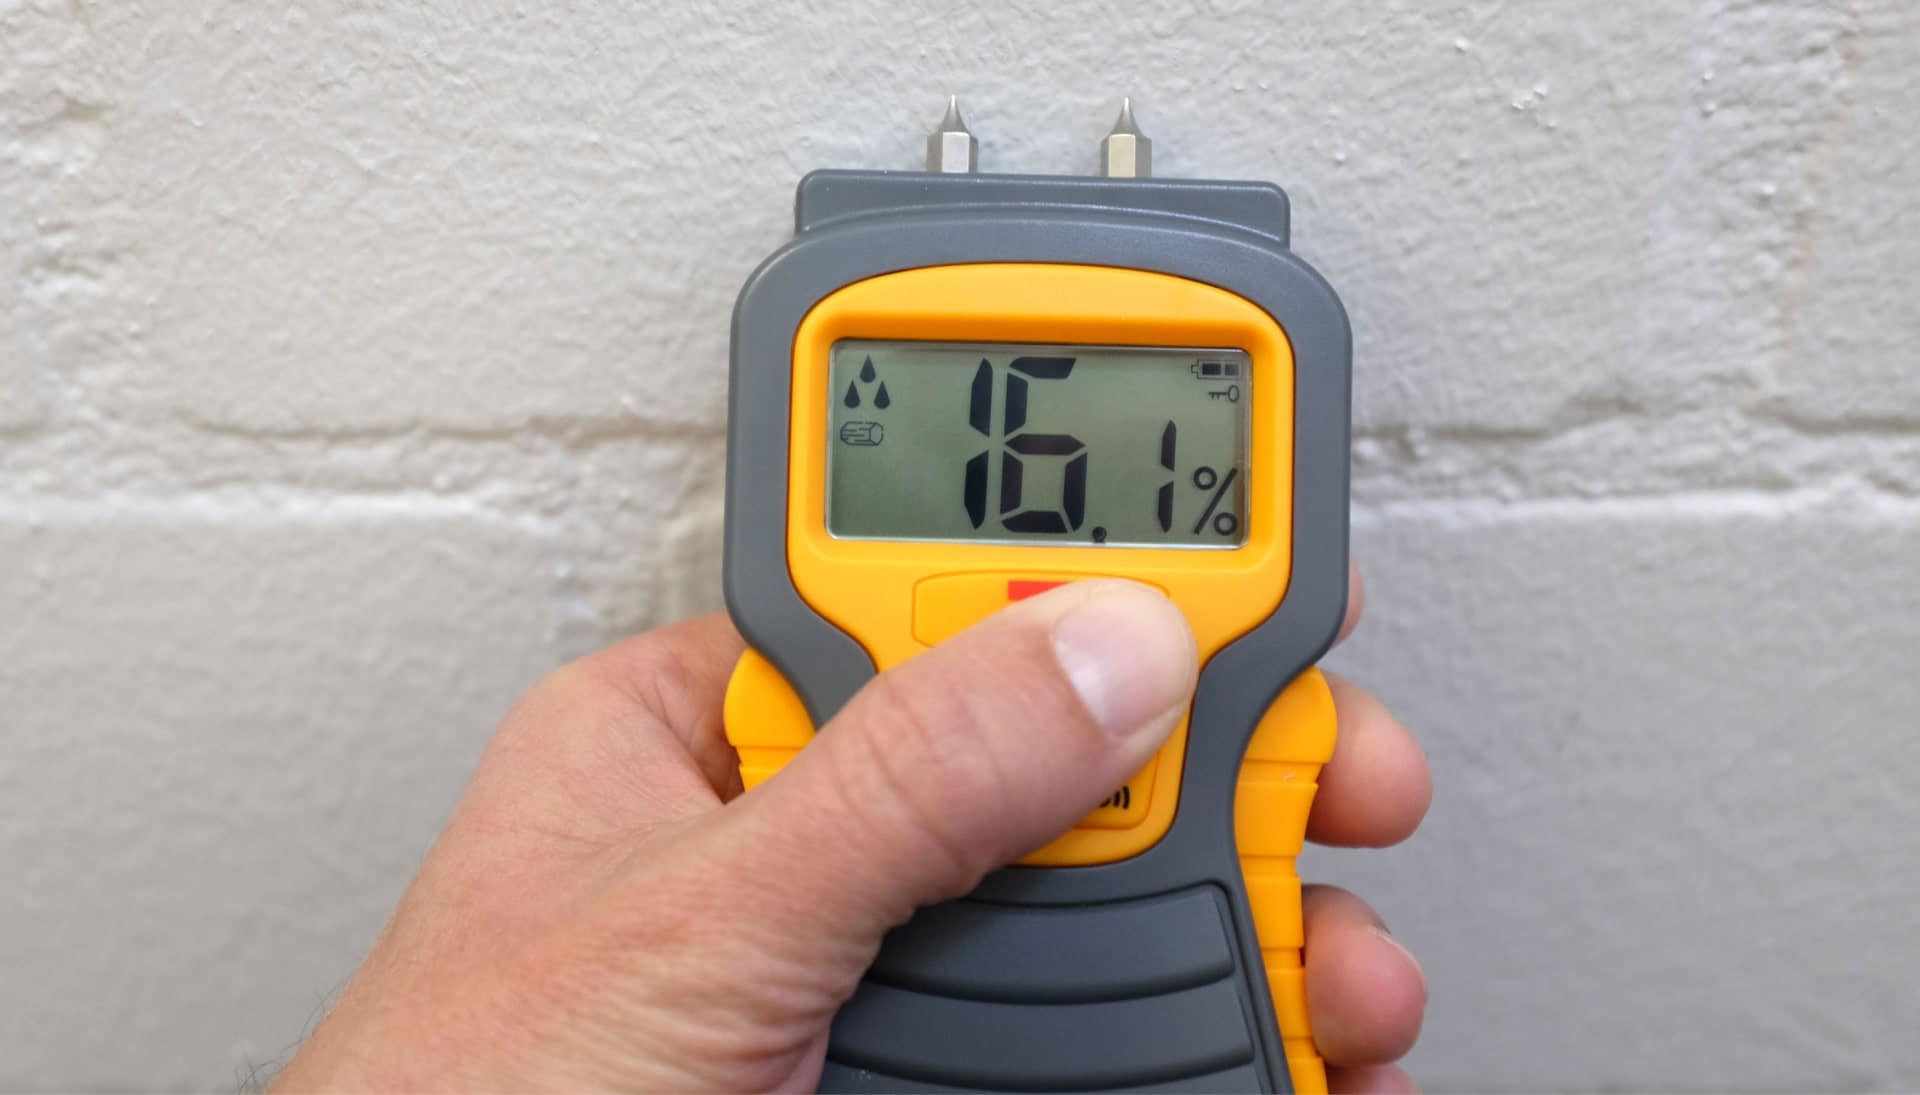 We provide fast, accurate, and affordable mold testing services in Wichita, Kansas.